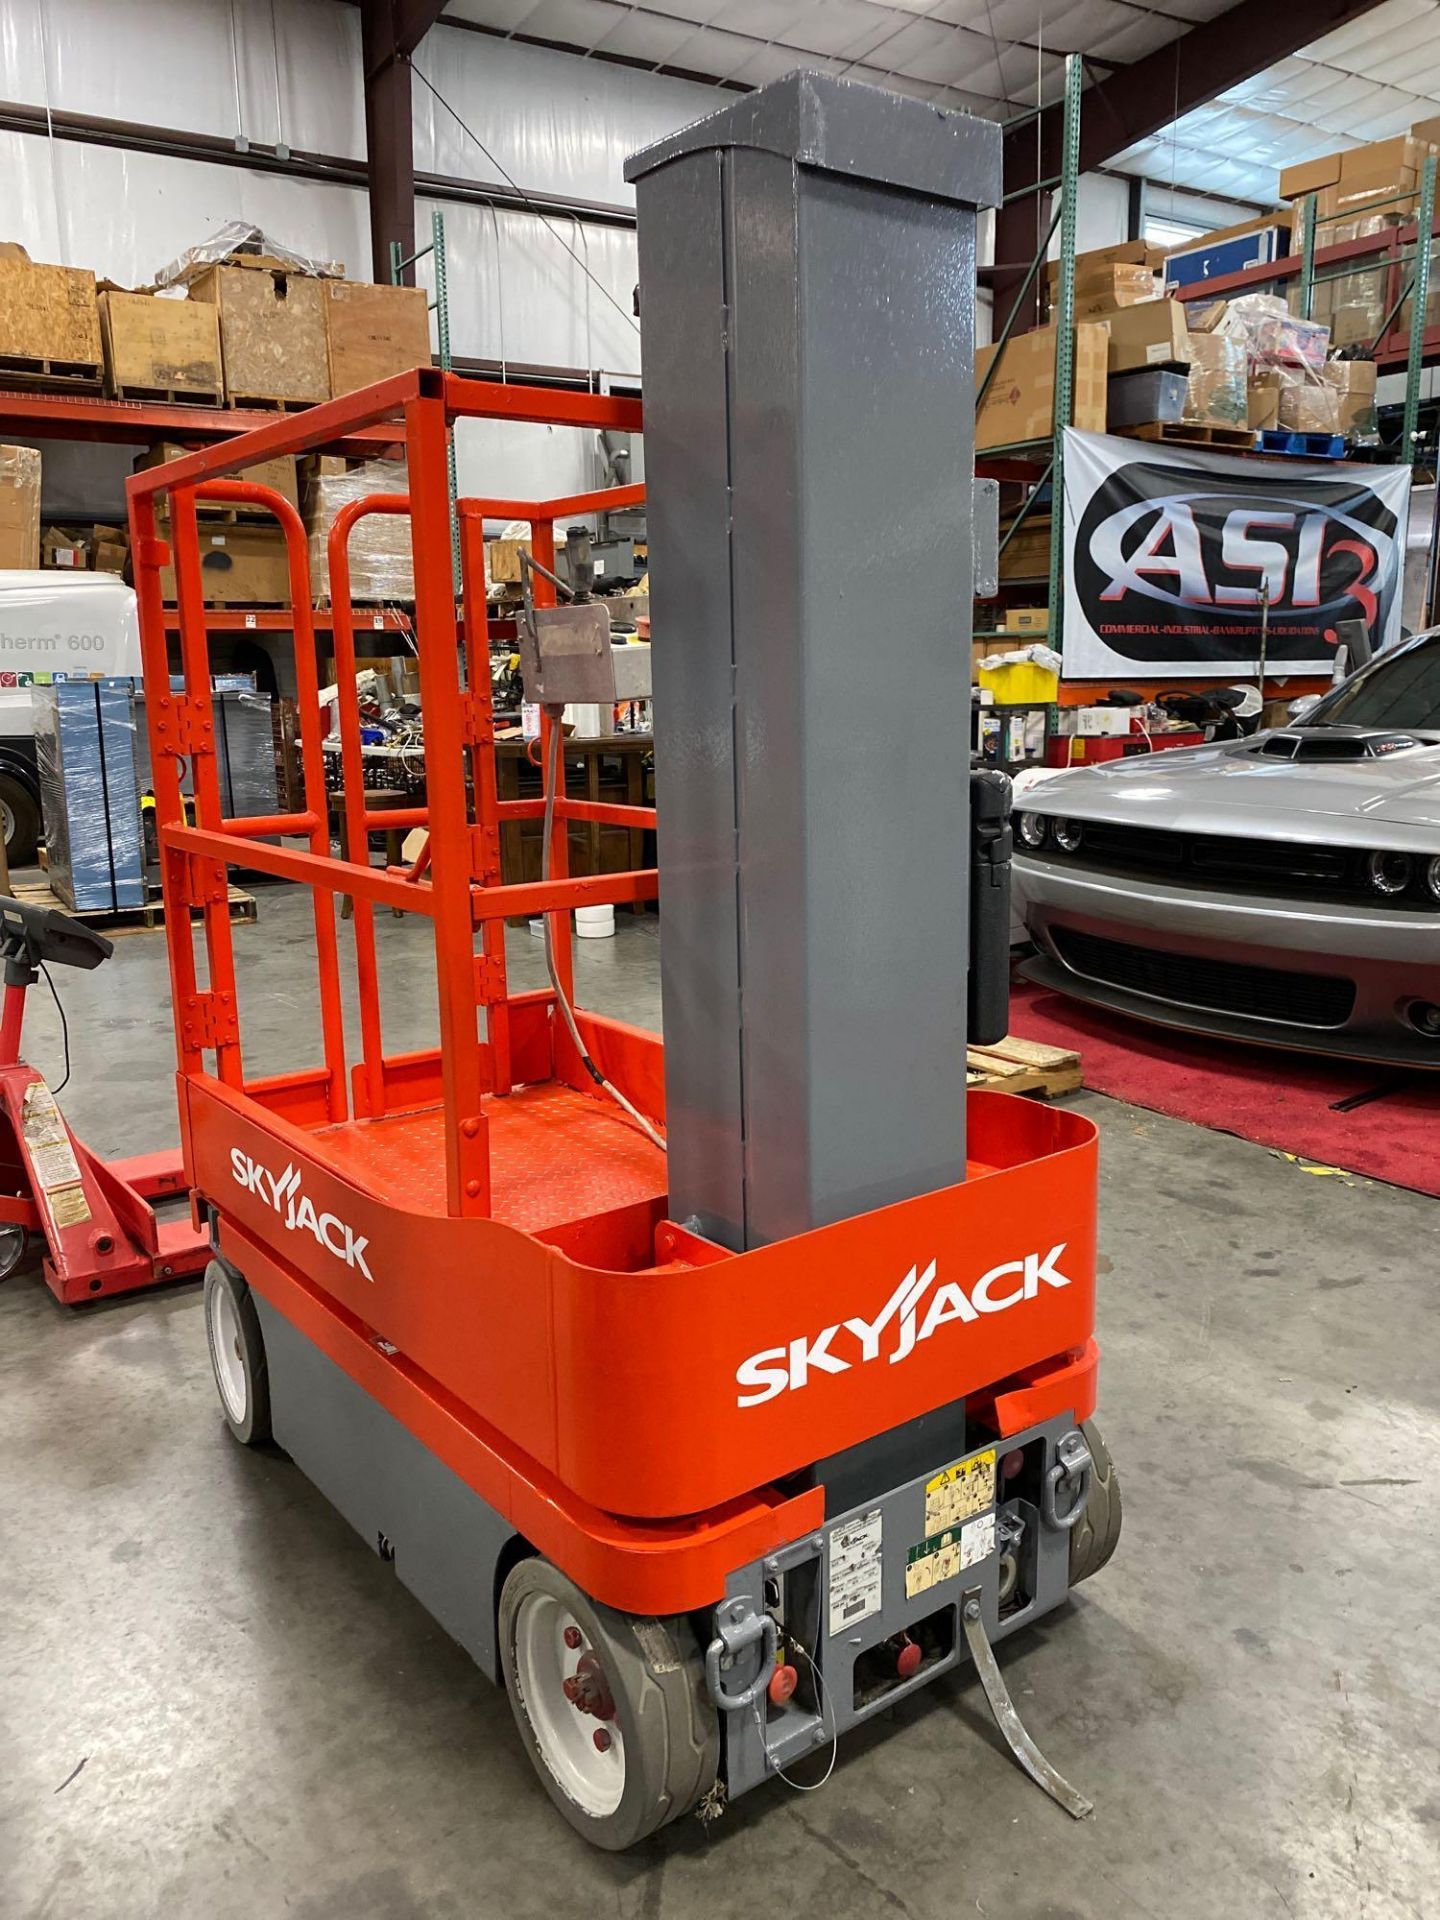 SKYJACK SJ12 ELECTRIC MAN LIFT, SELF PROPELLED, BUILT IN BATTERY CHARGER, 12' PLATFORM HEIGHT, 153 H - Image 6 of 14